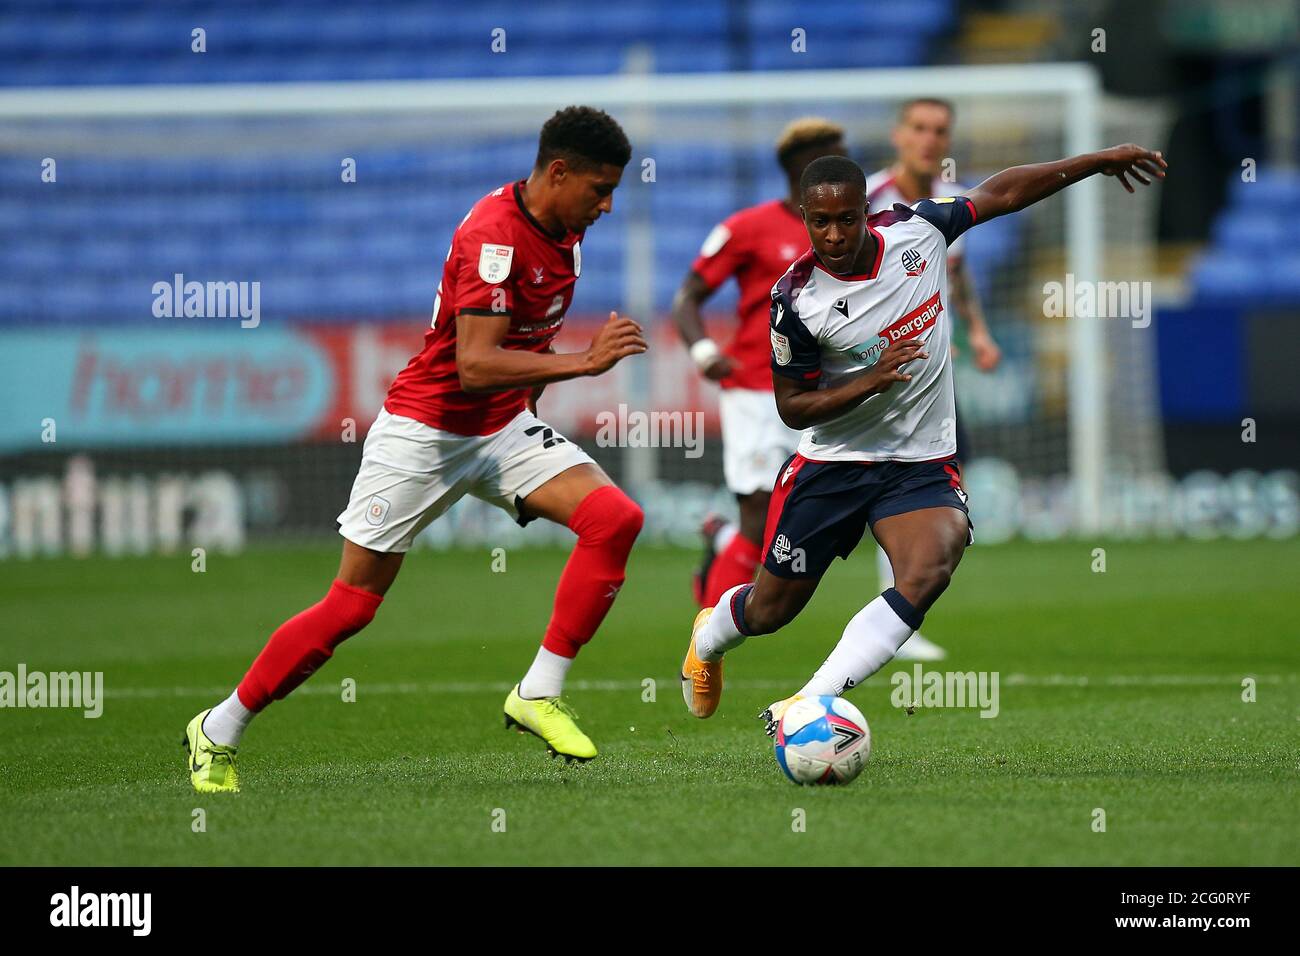 BOLTON, ENGLAND. SEPTEMBER 8TH 2020 Boltons Daniel Powell chases down Crewe's Travis Johnson during the EFL Trophy match between Bolton Wanderers and Crewe Alexandra at the Reebok Stadium, Bolton. (Credit: Chris Donnelly | MI News) Credit: MI News & Sport /Alamy Live News Stock Photo